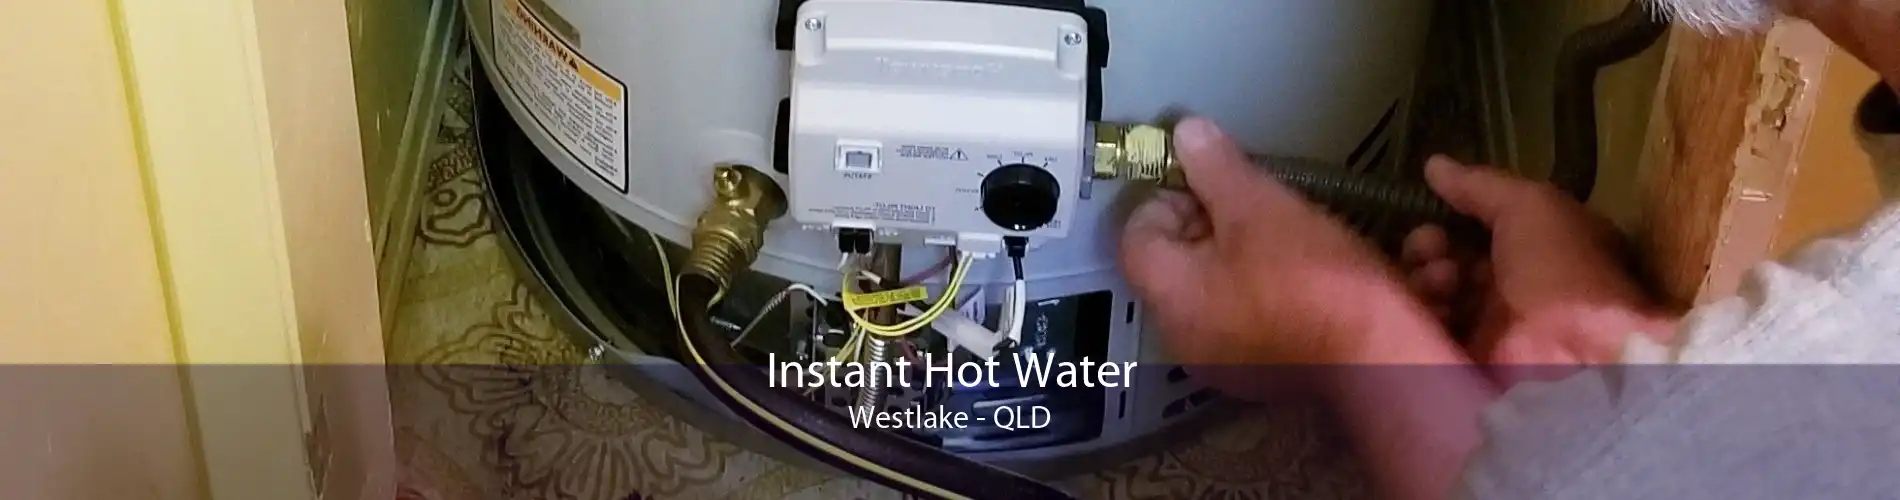 Instant Hot Water Westlake - QLD